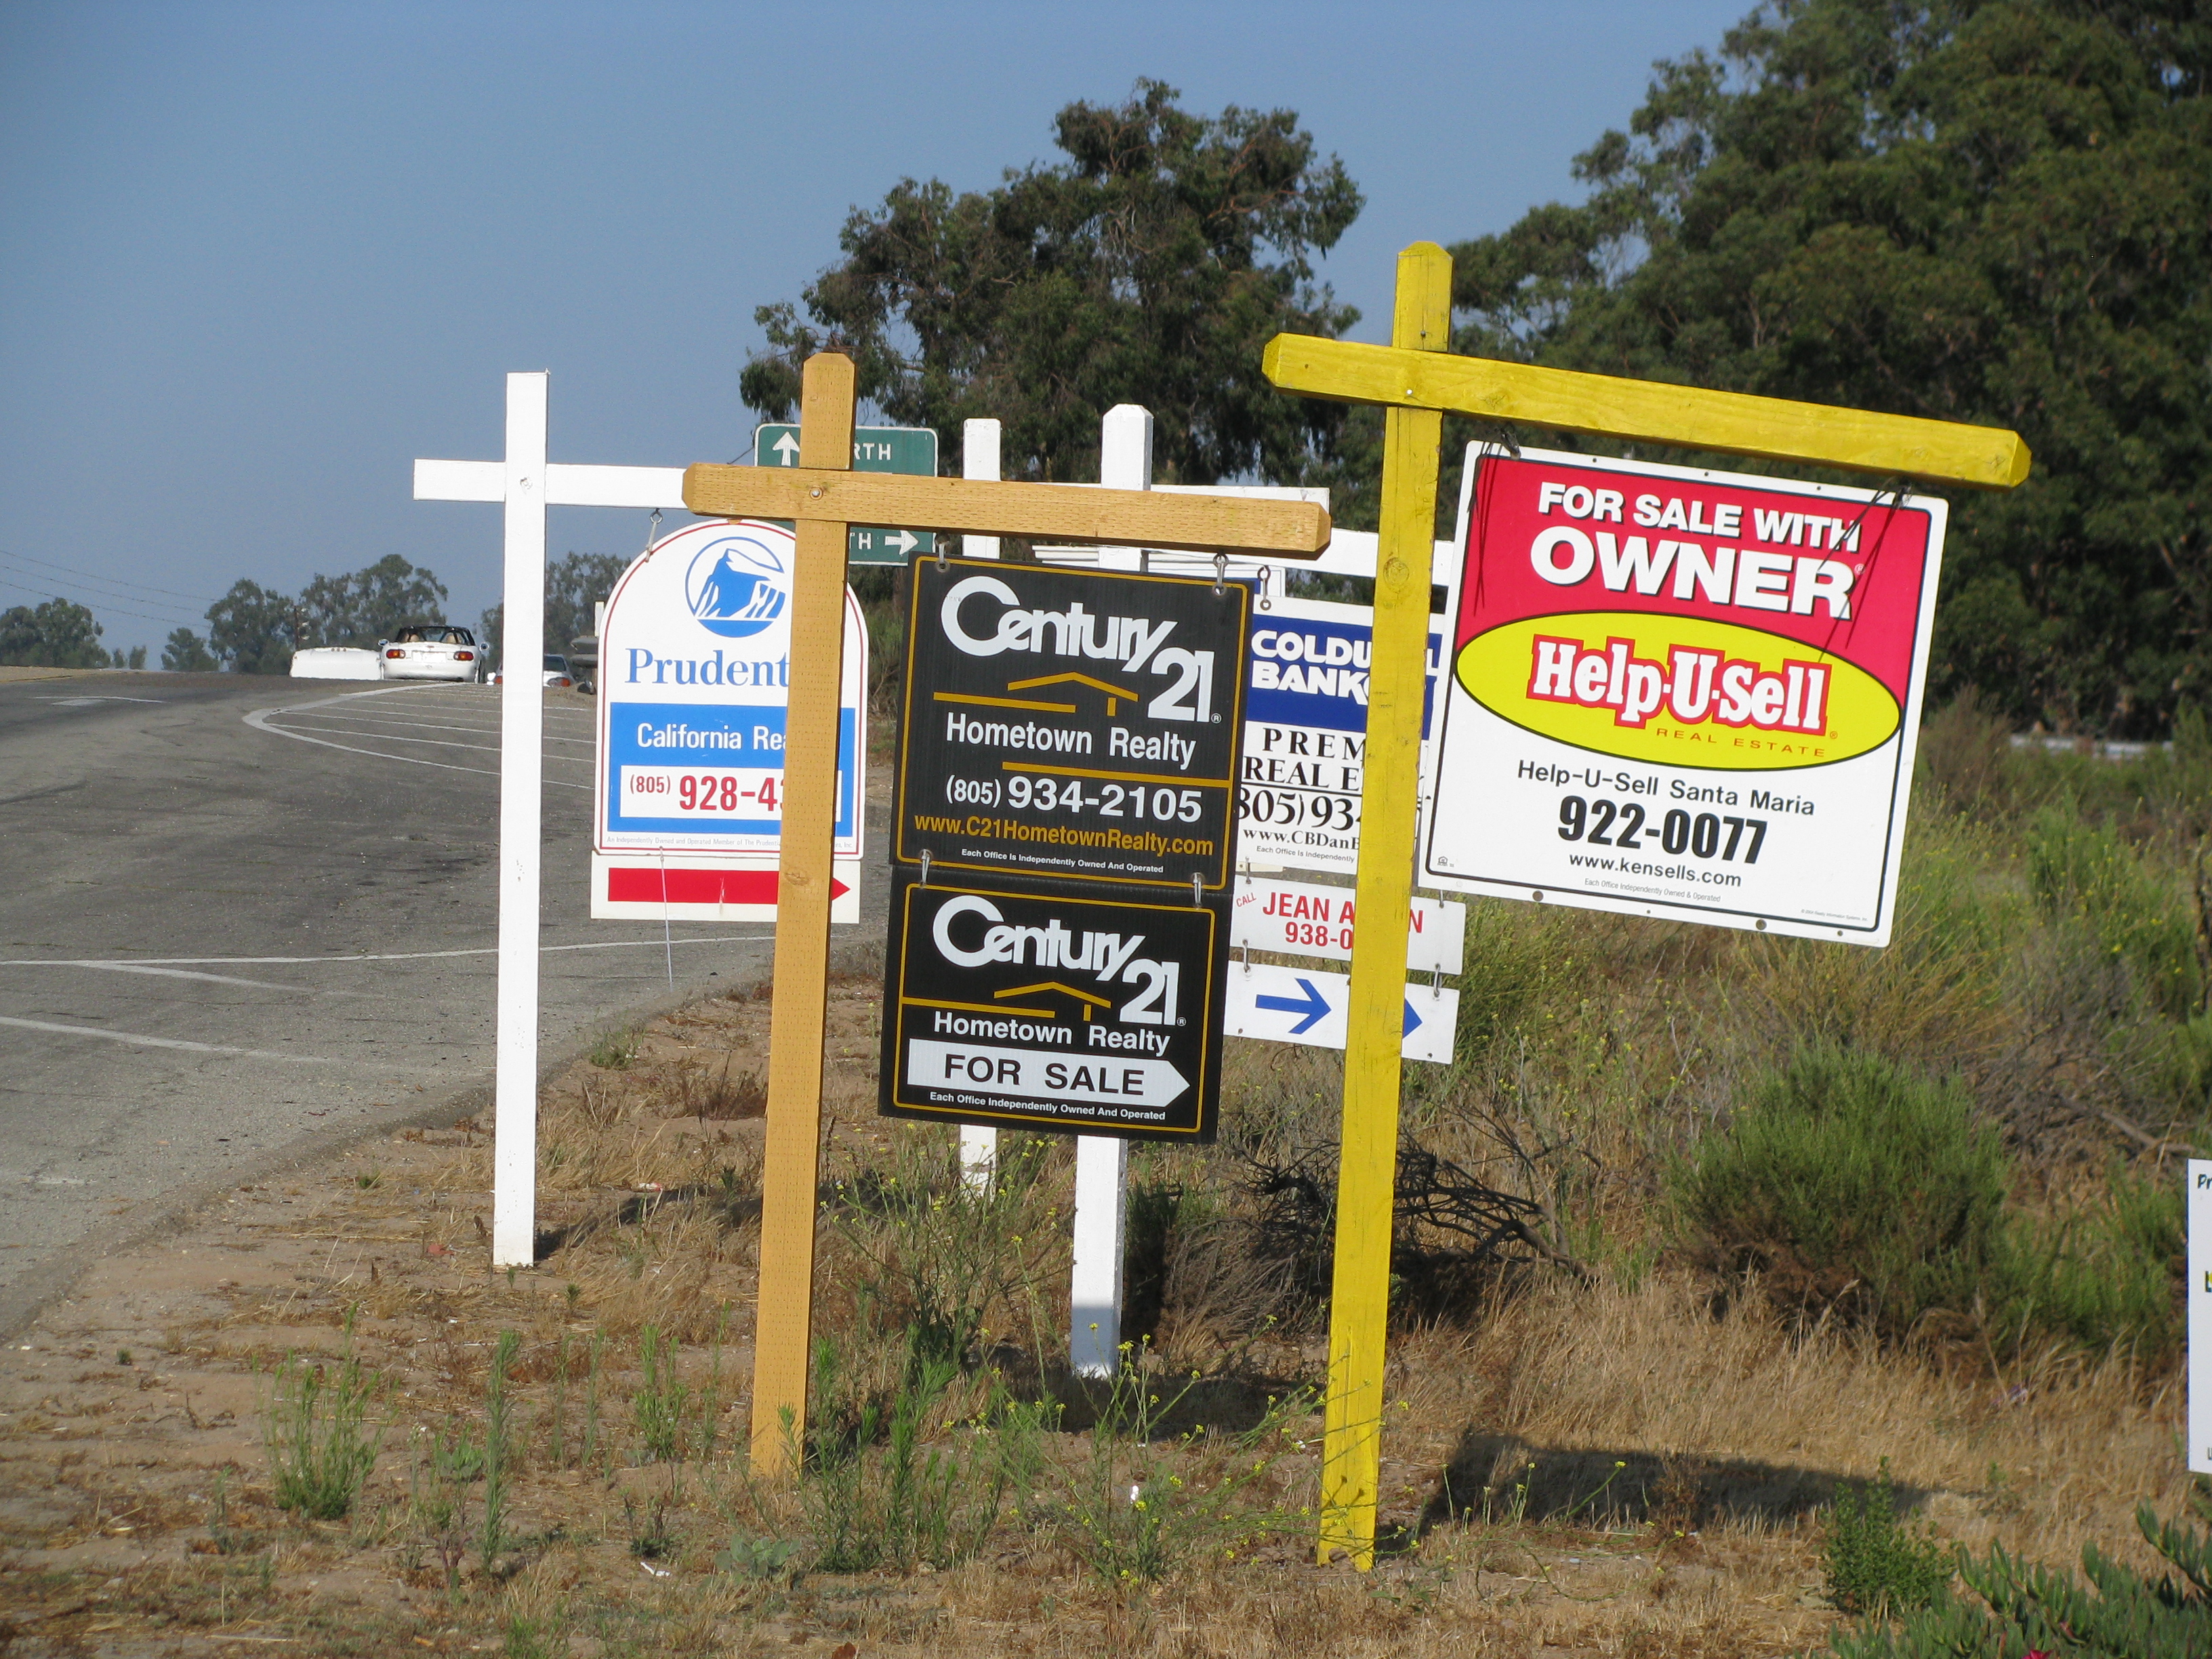 Kamloops Property For Sale Signs